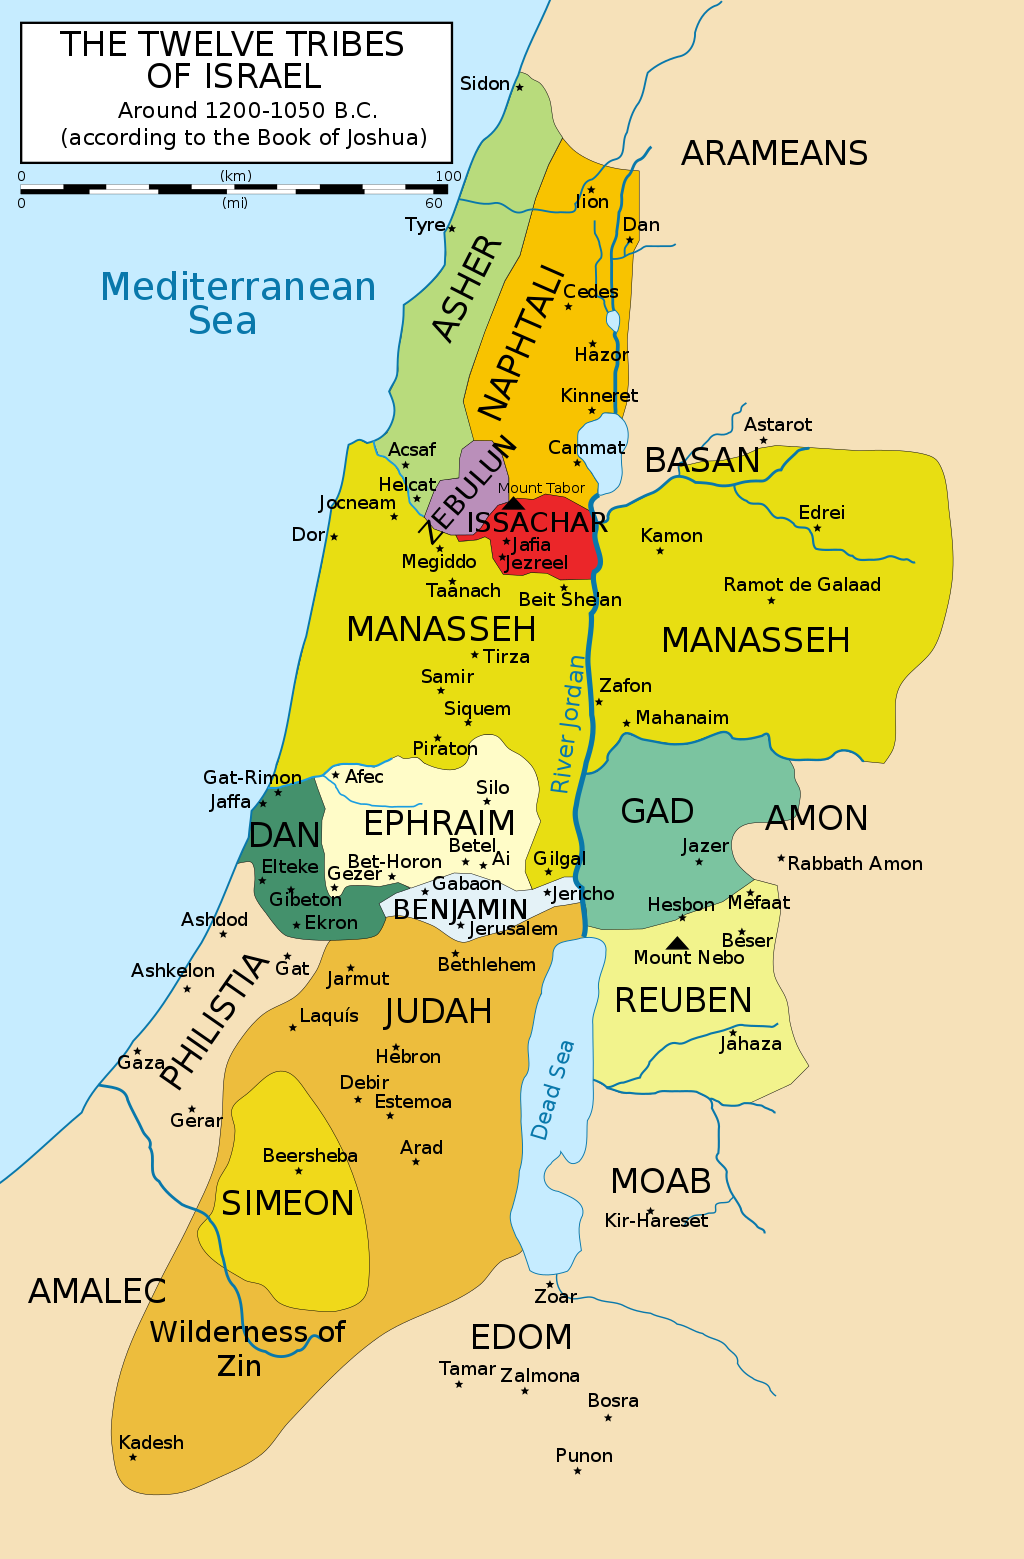 1024px-12_Tribes_of_Israel_Map.svg.png